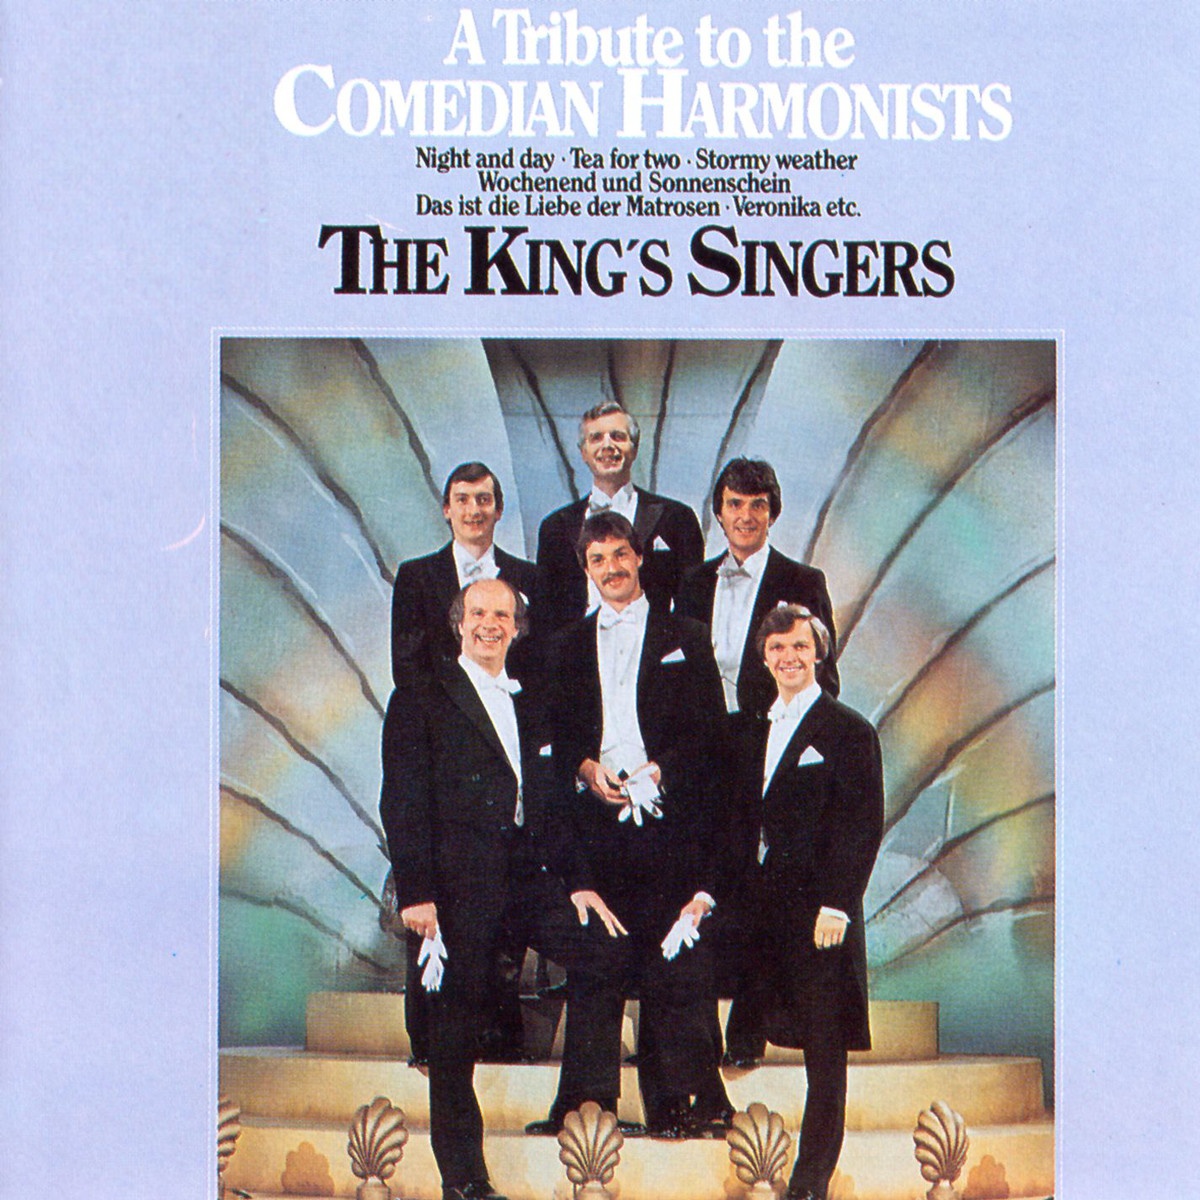 A Tribute to the Comedian Harmonists